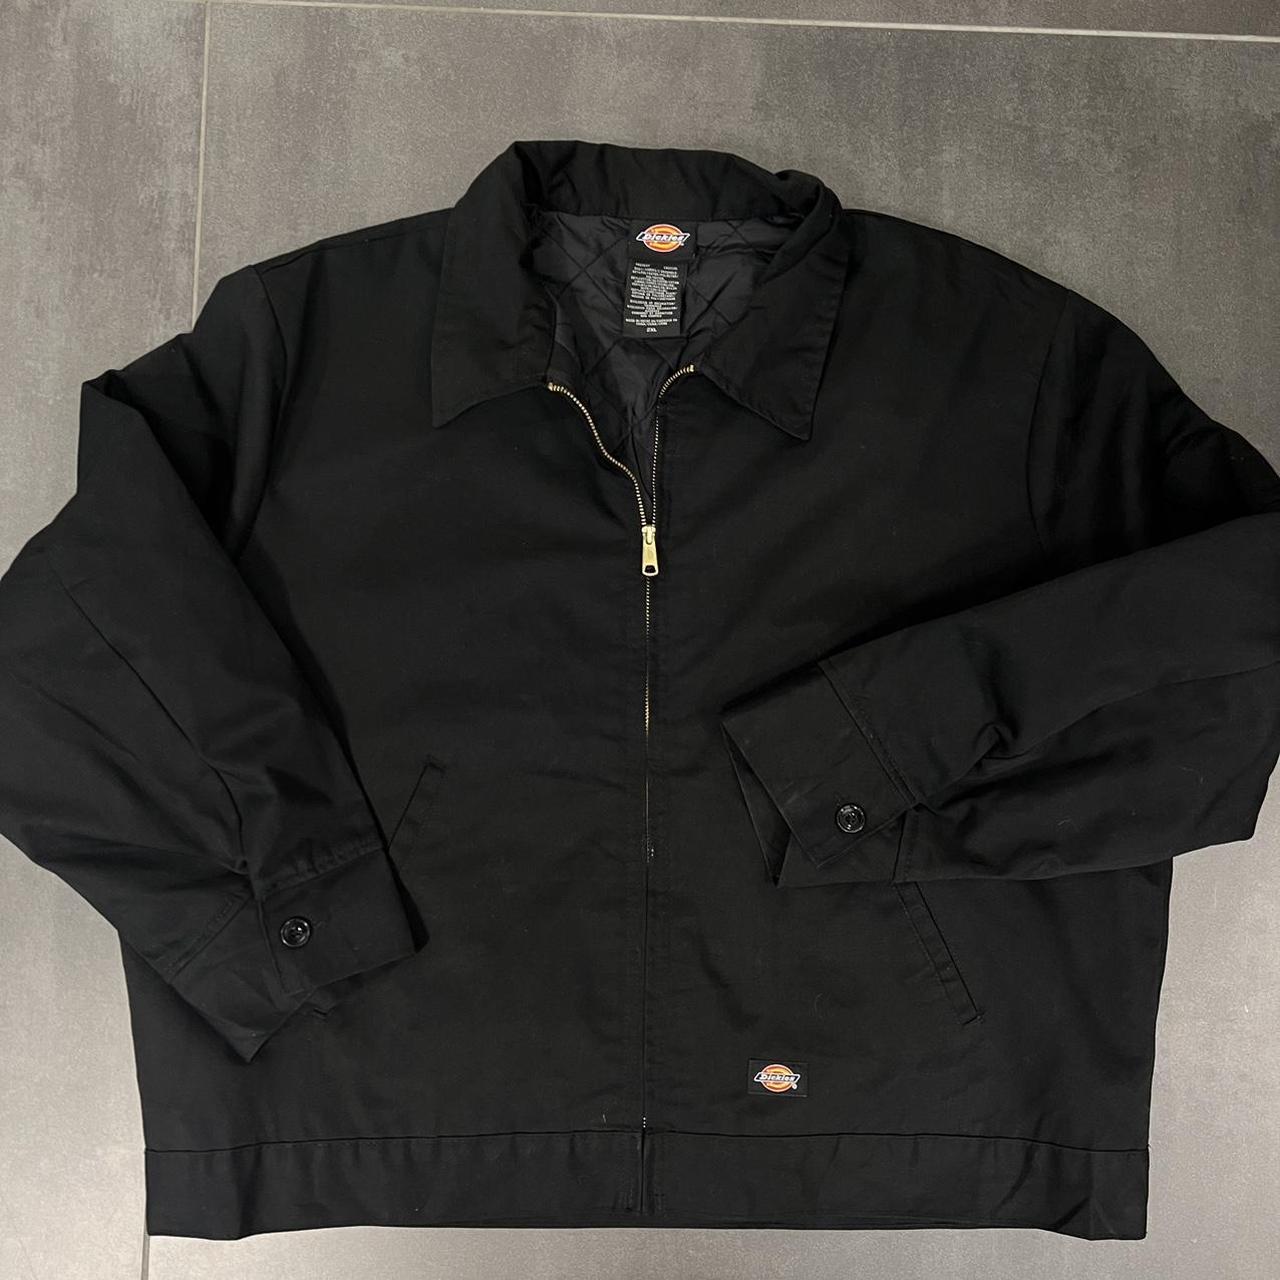 black dickies jacket in great condition, no visible... - Depop